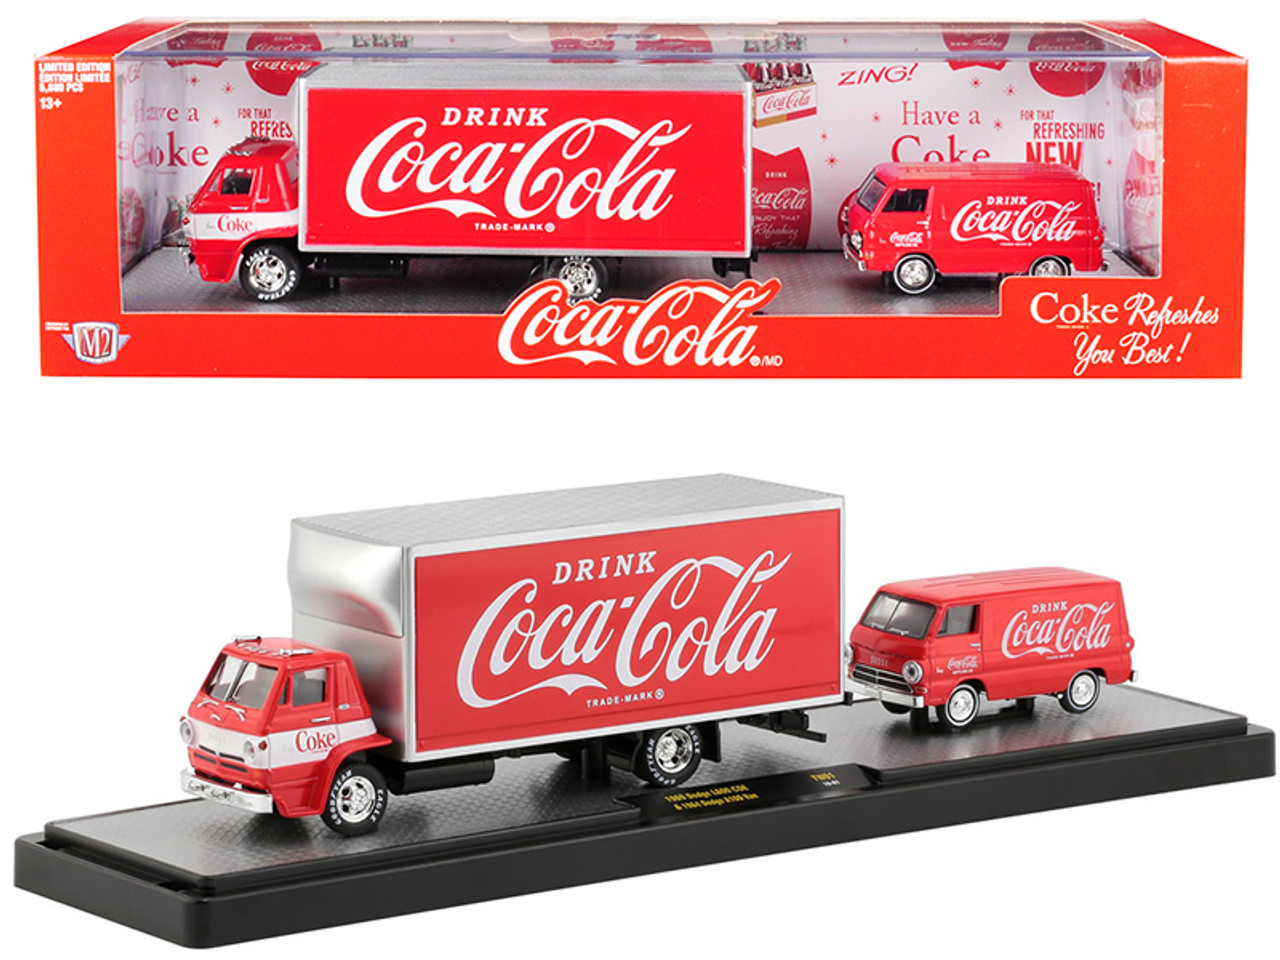 1969 Dodge L600 COE Truck Coke Red with White Stripe and 1964 Dodge A100 Van Coke Red "Coca-Cola" Set Limited Edition to 5880 pieces Worldwide 1/64 Diecast Models by M2 Machines